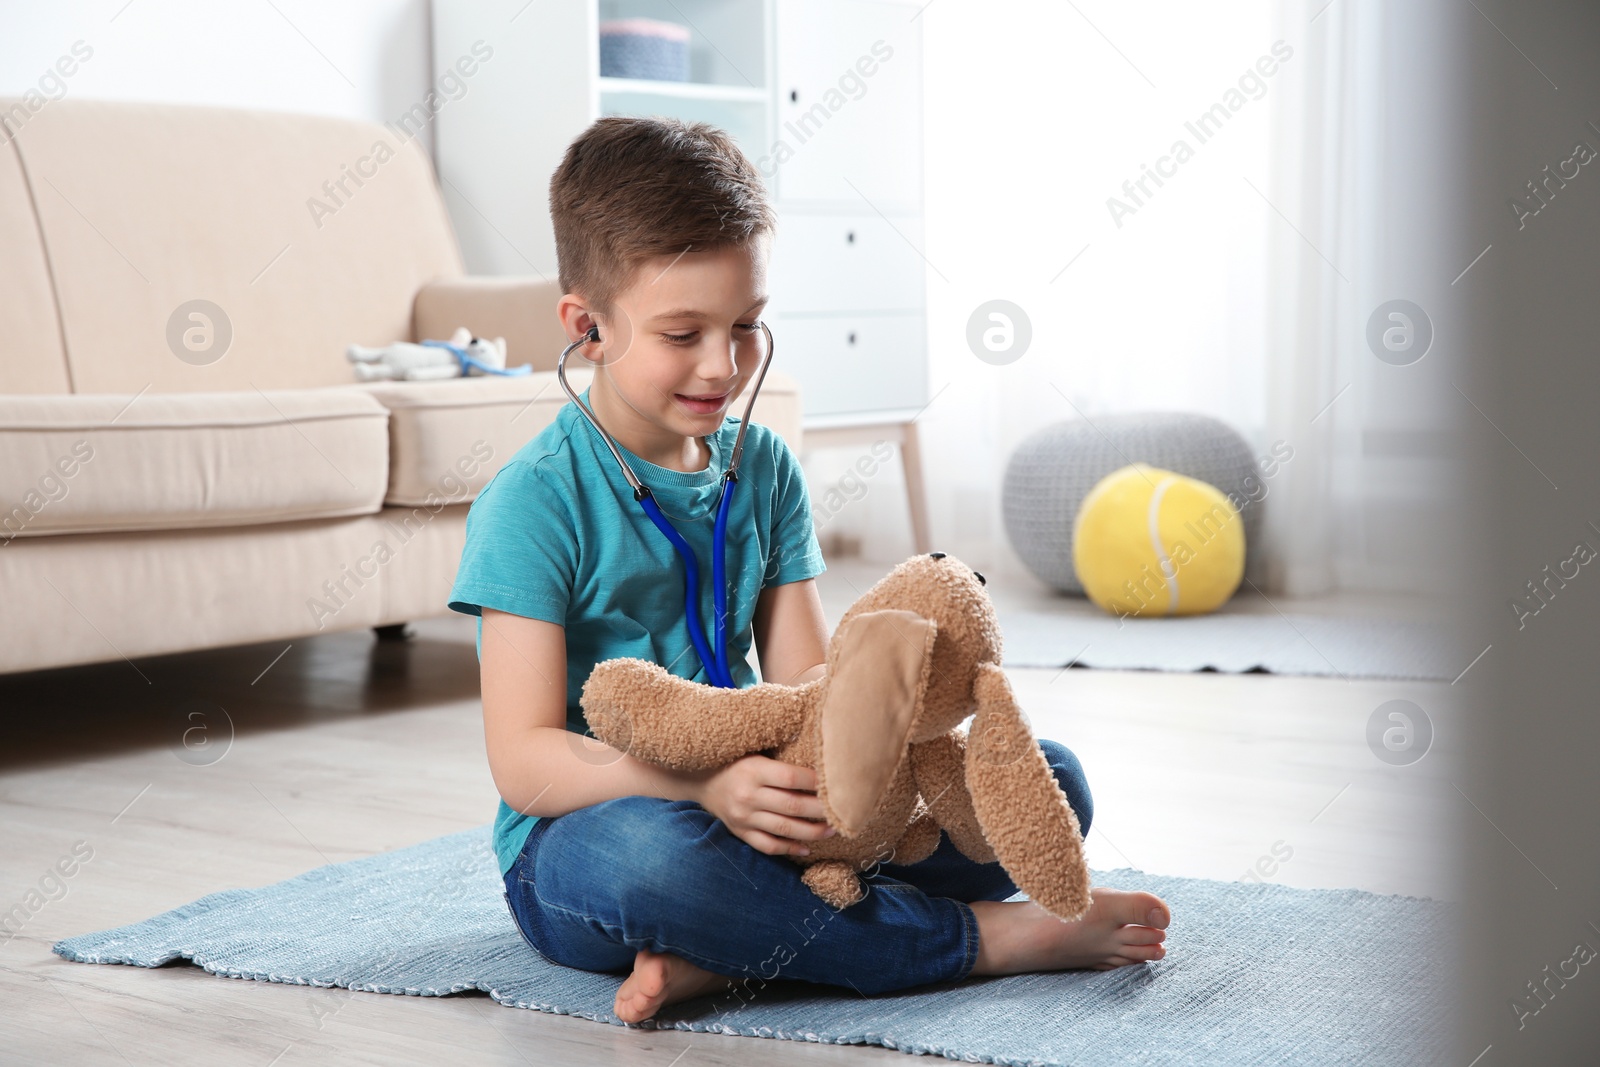 Photo of Cute child imagining himself as doctor while playing with stethoscope and toy bunny at home